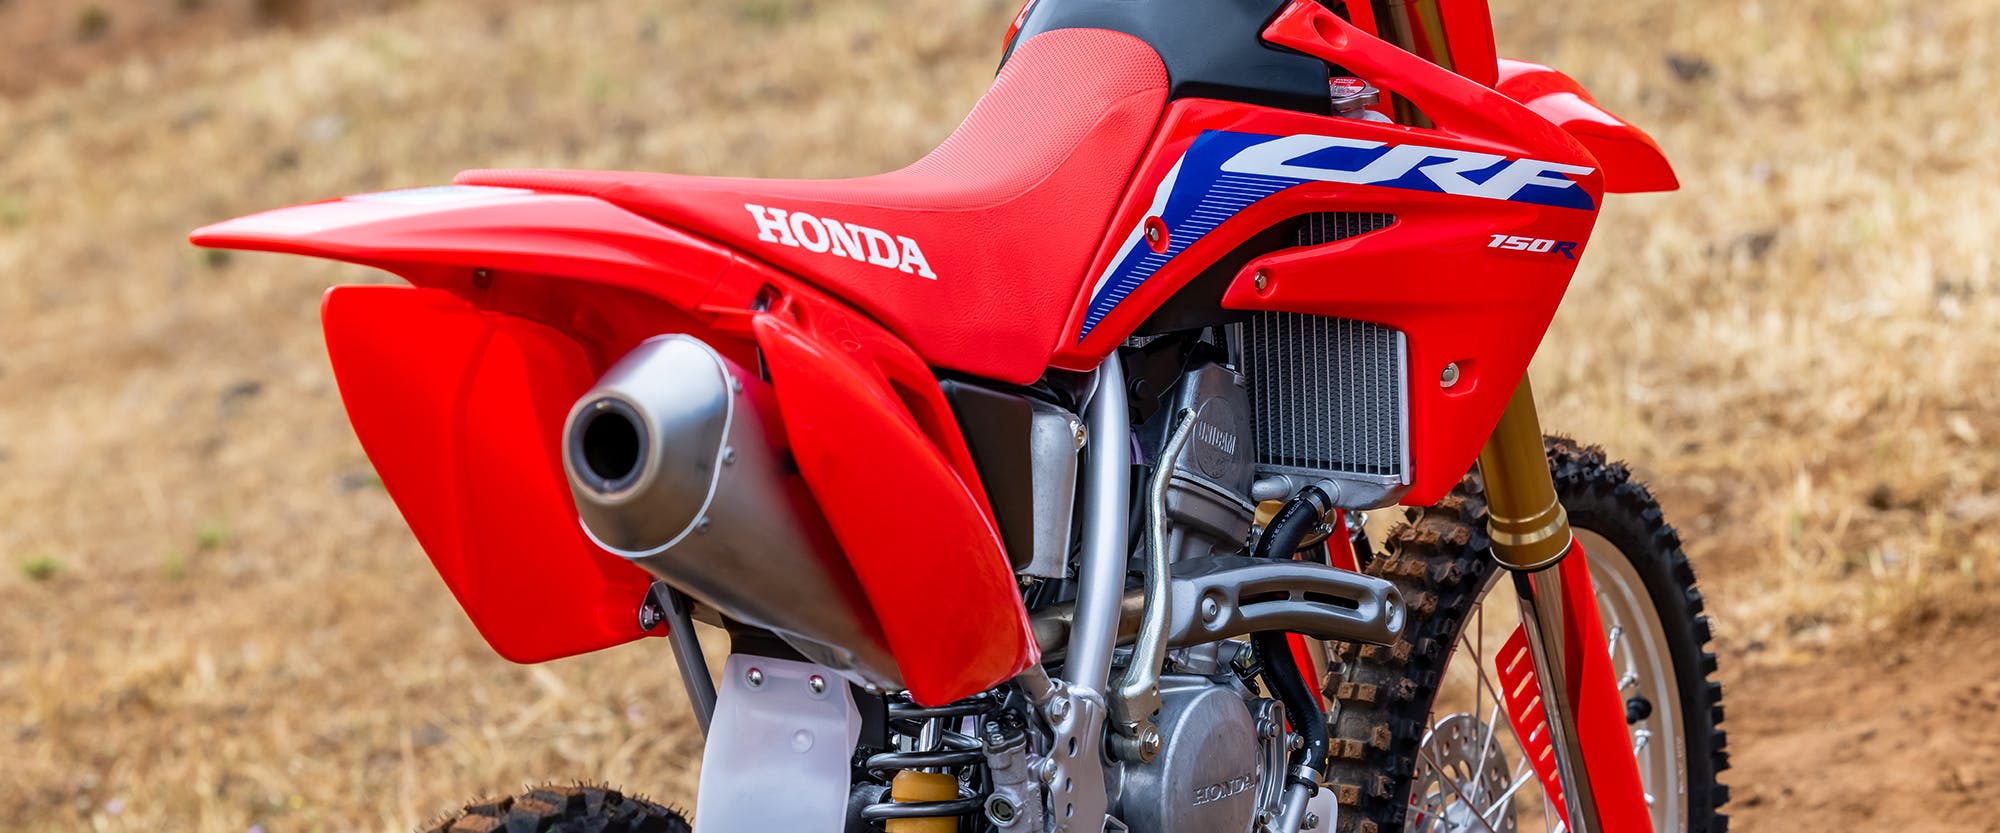 Honda CRF150R in extreme red colour